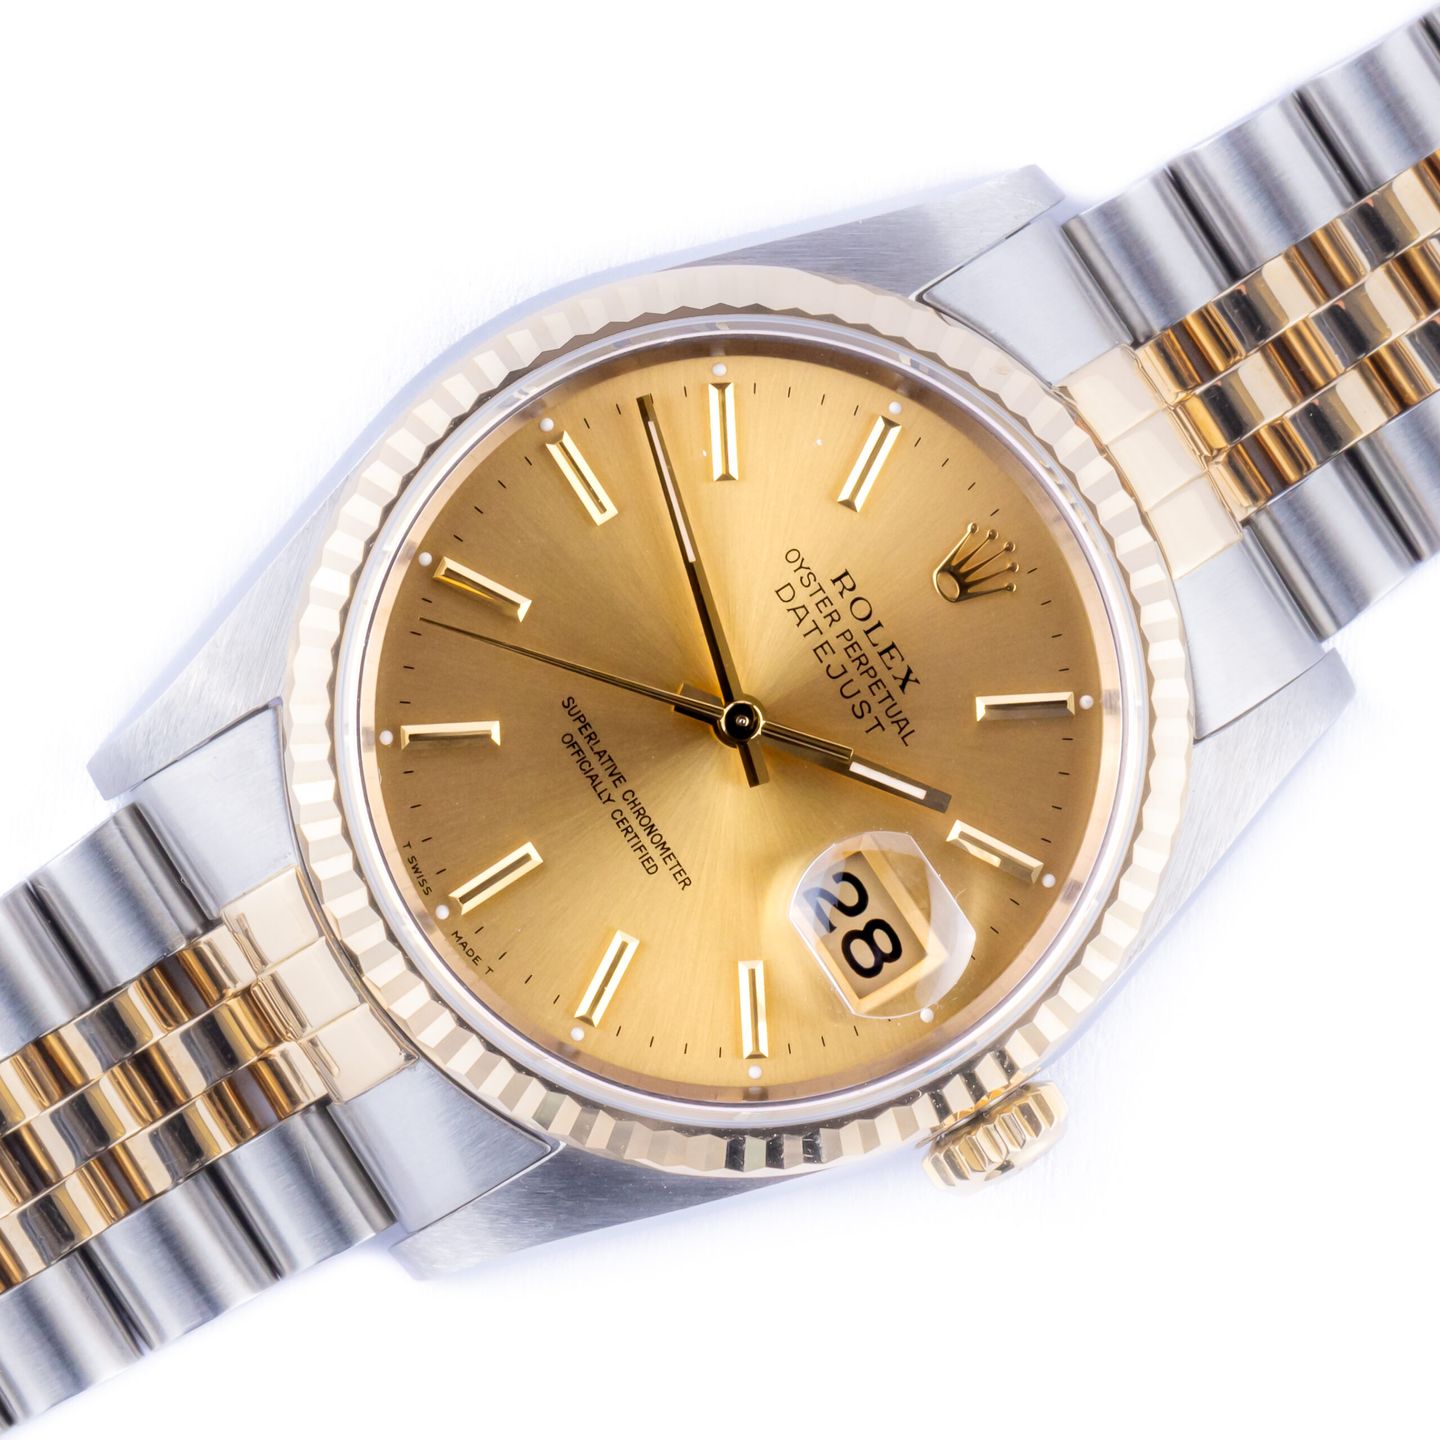 Rolex Datejust 36 16233 (1991) - Champagne dial 36 mm Gold/Steel case (1/7)